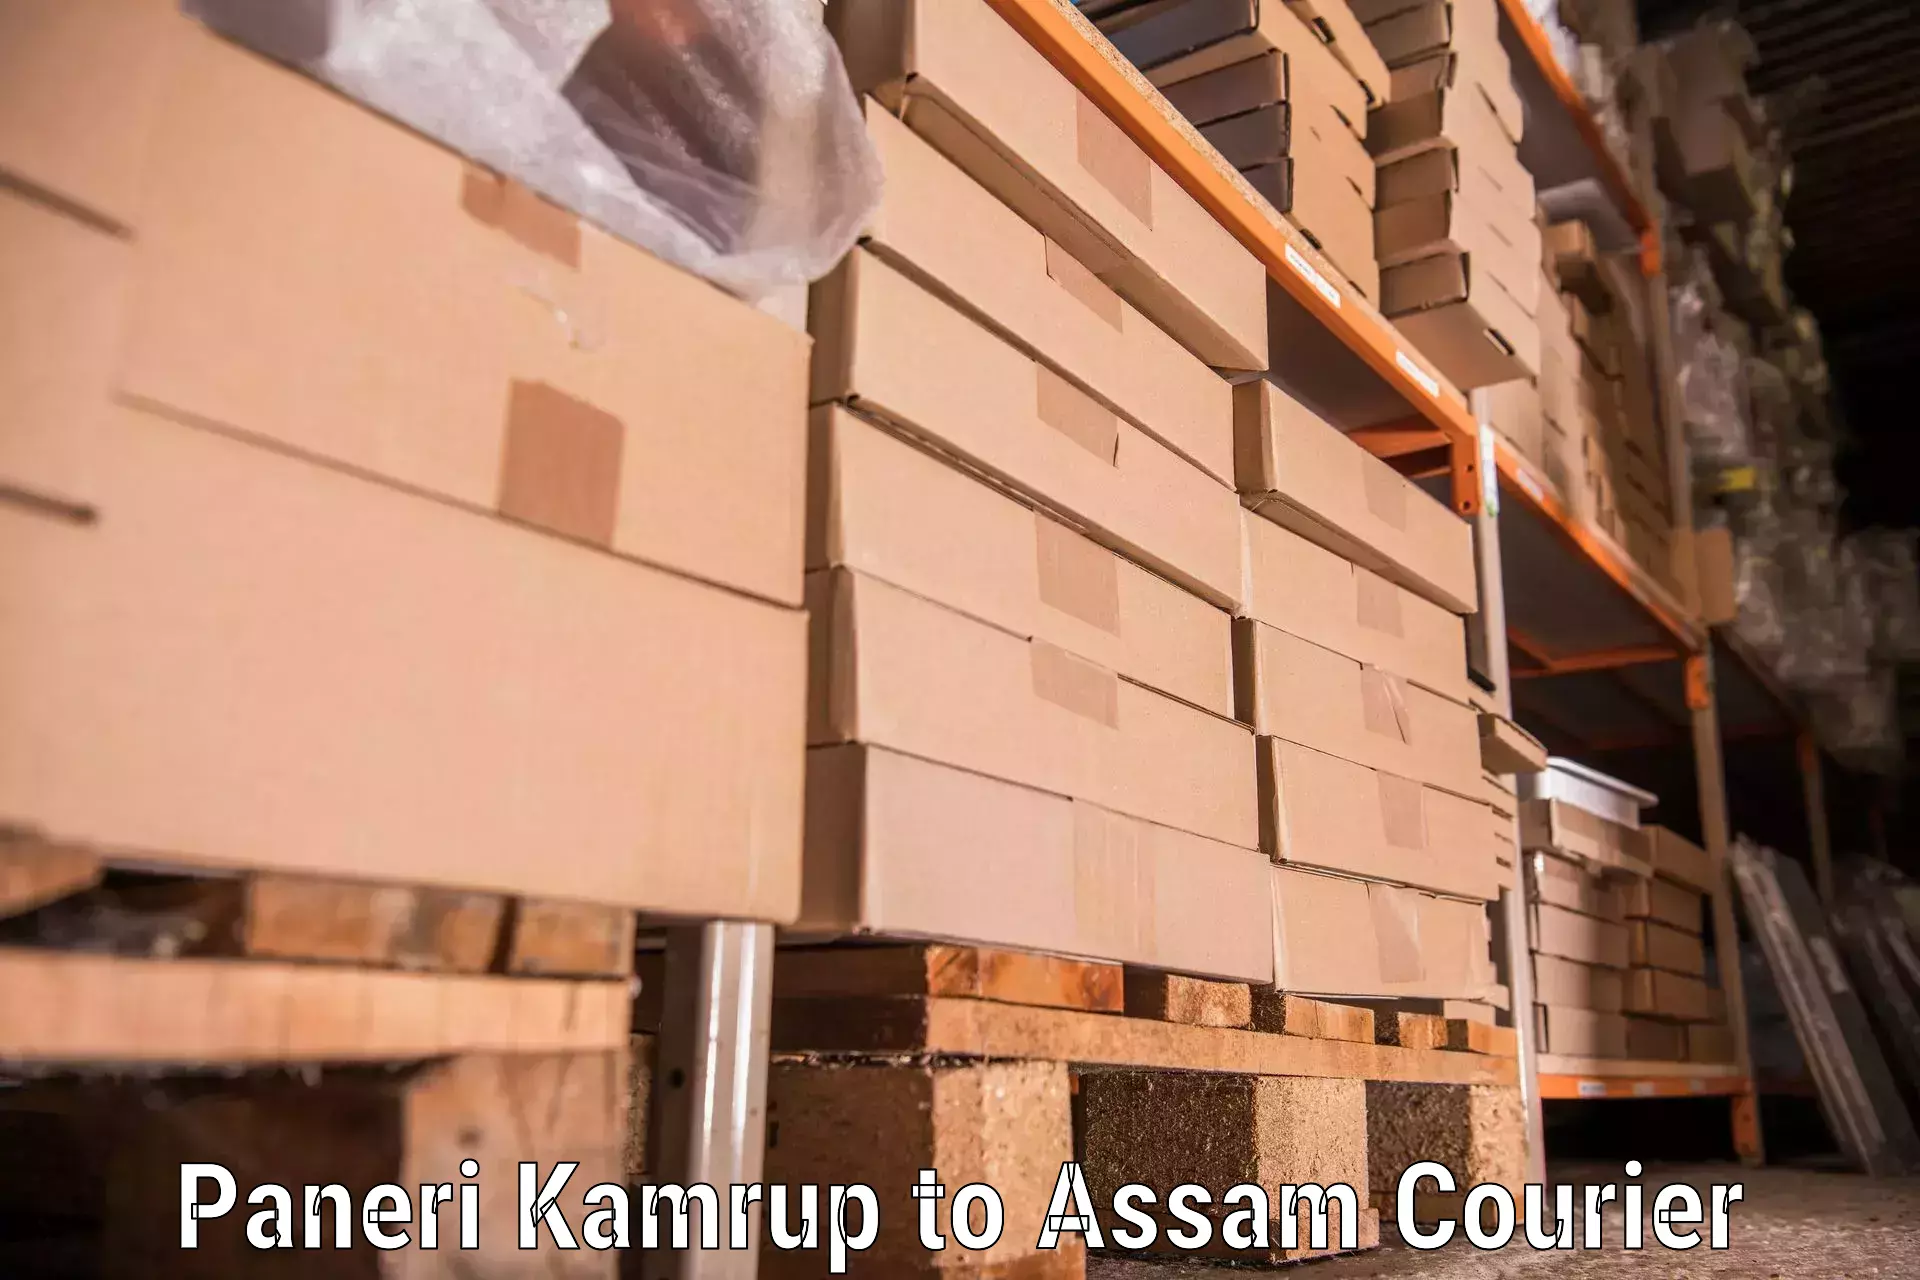 Efficient relocation services Paneri Kamrup to Dhemaji